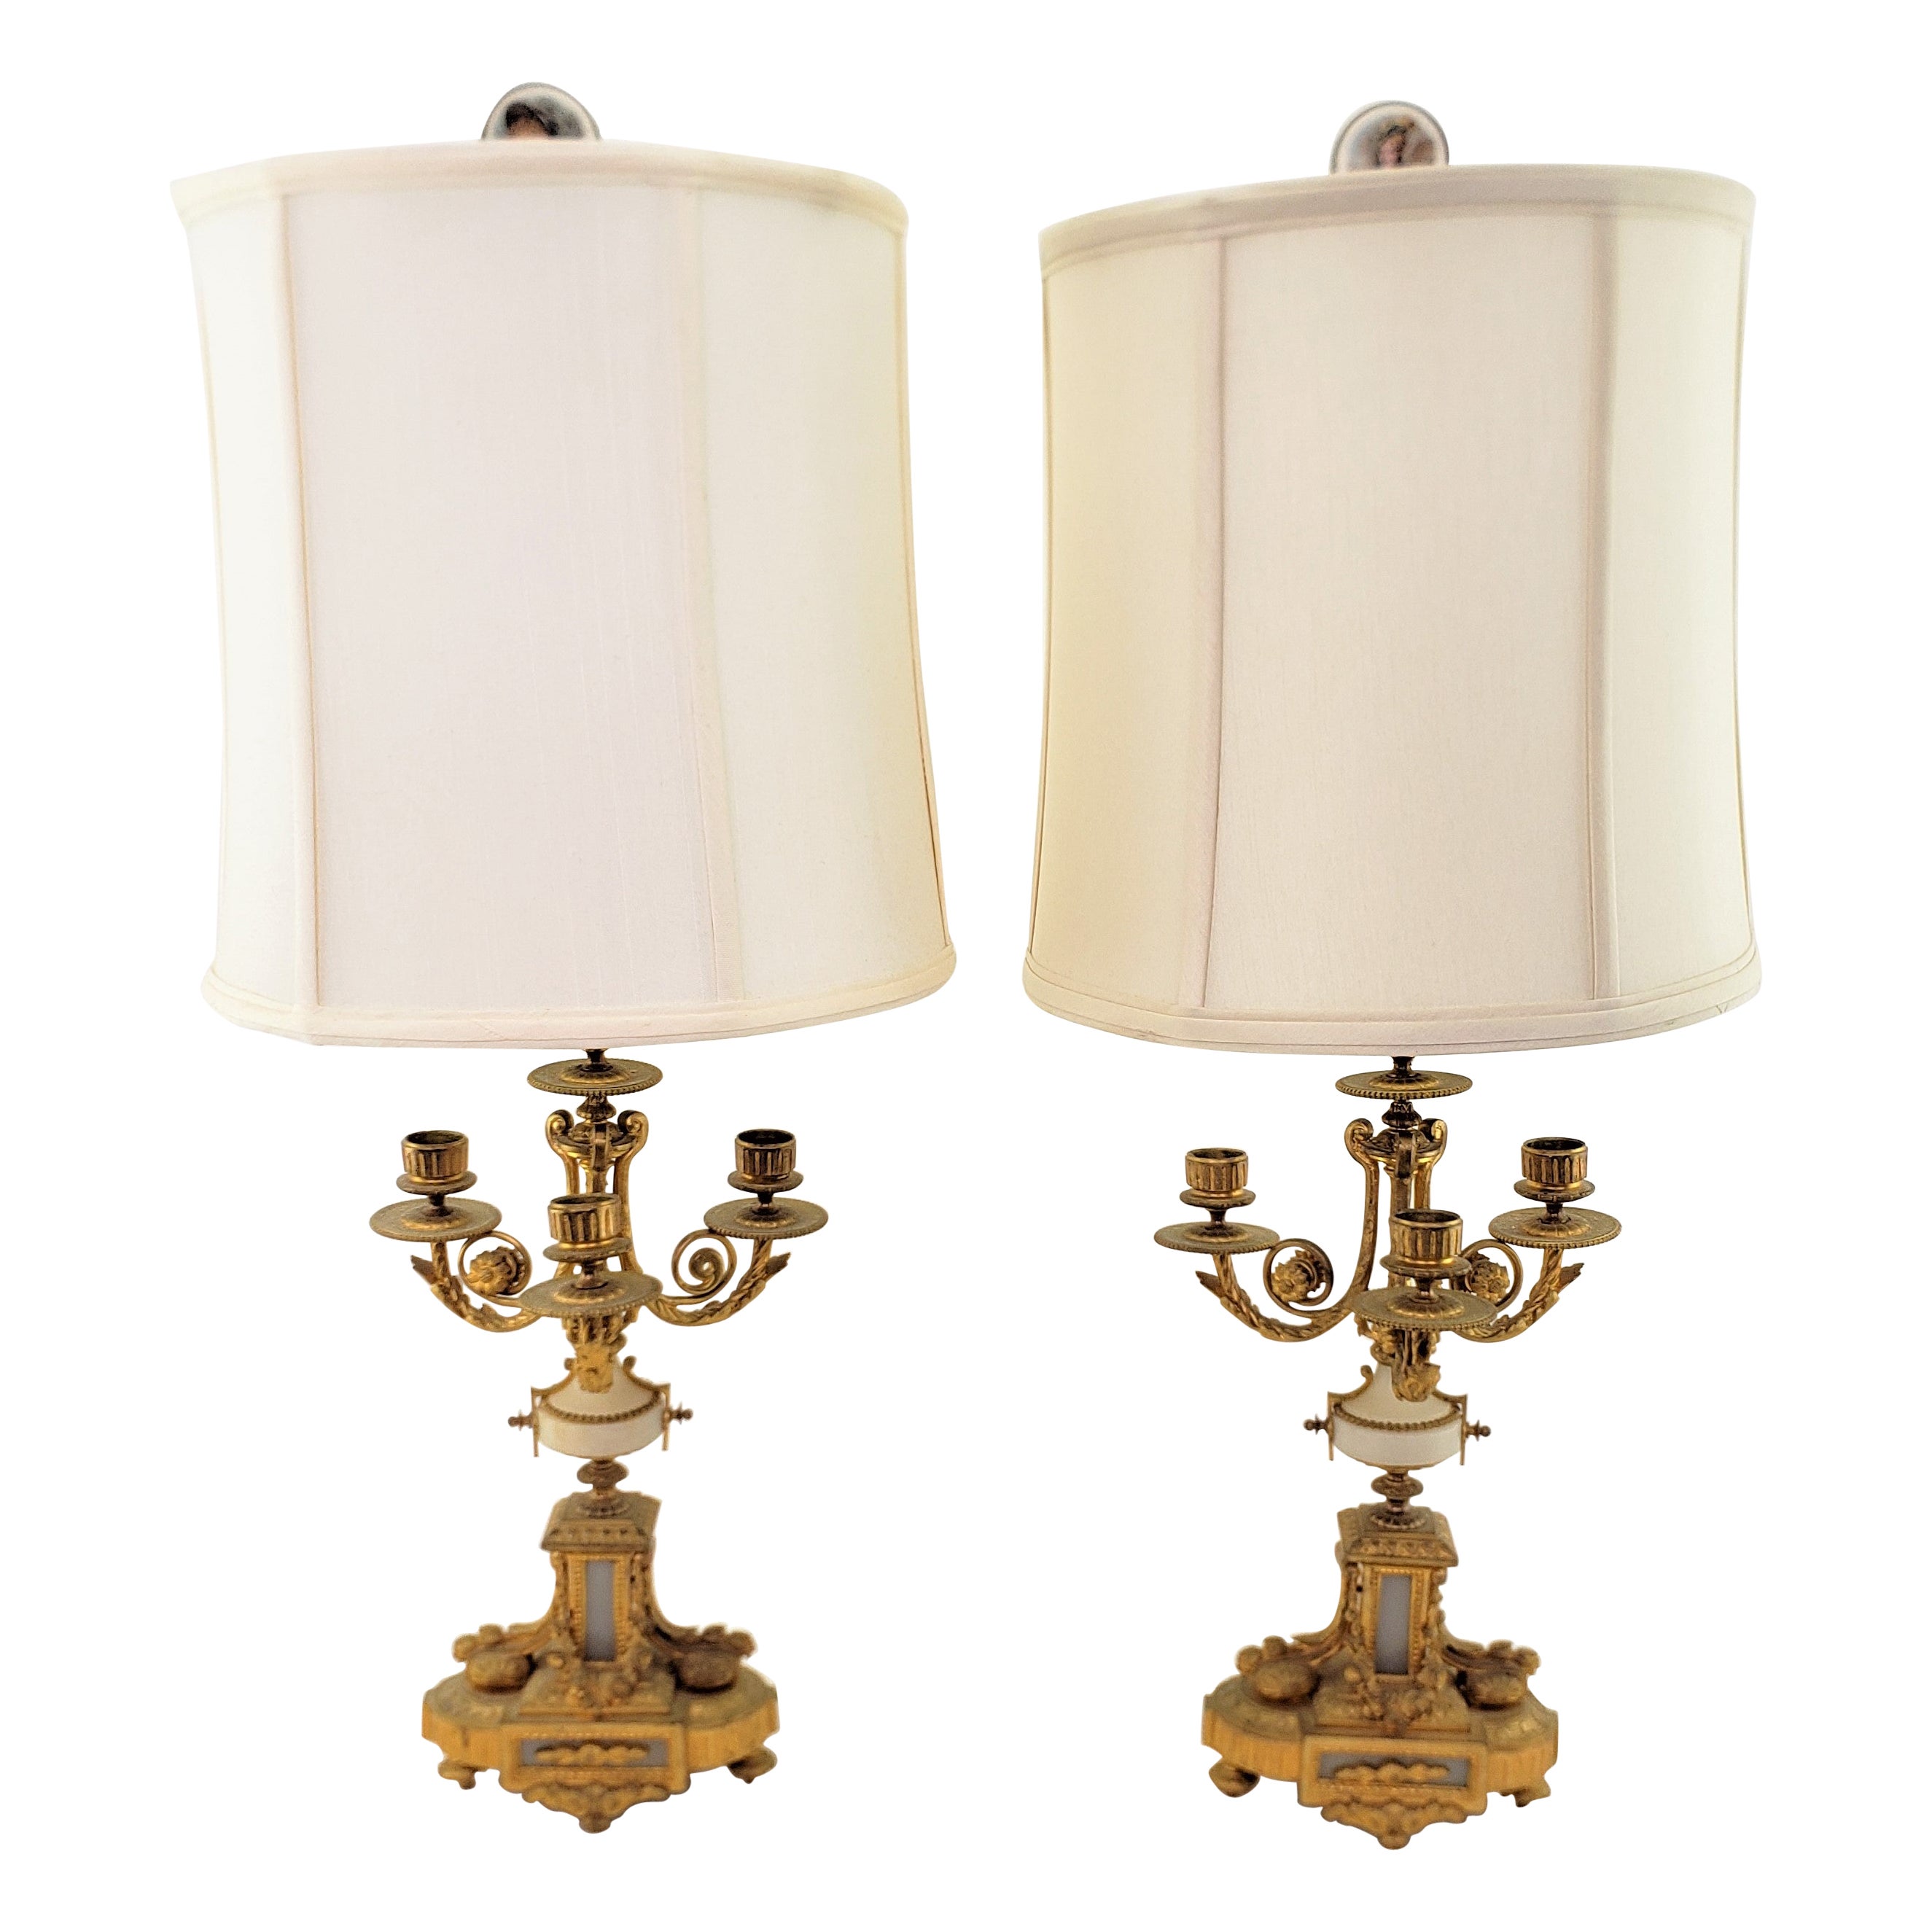 Pair of Ornate Antique French Gilt Bronze Converted Candelabra Table Lamps For Sale